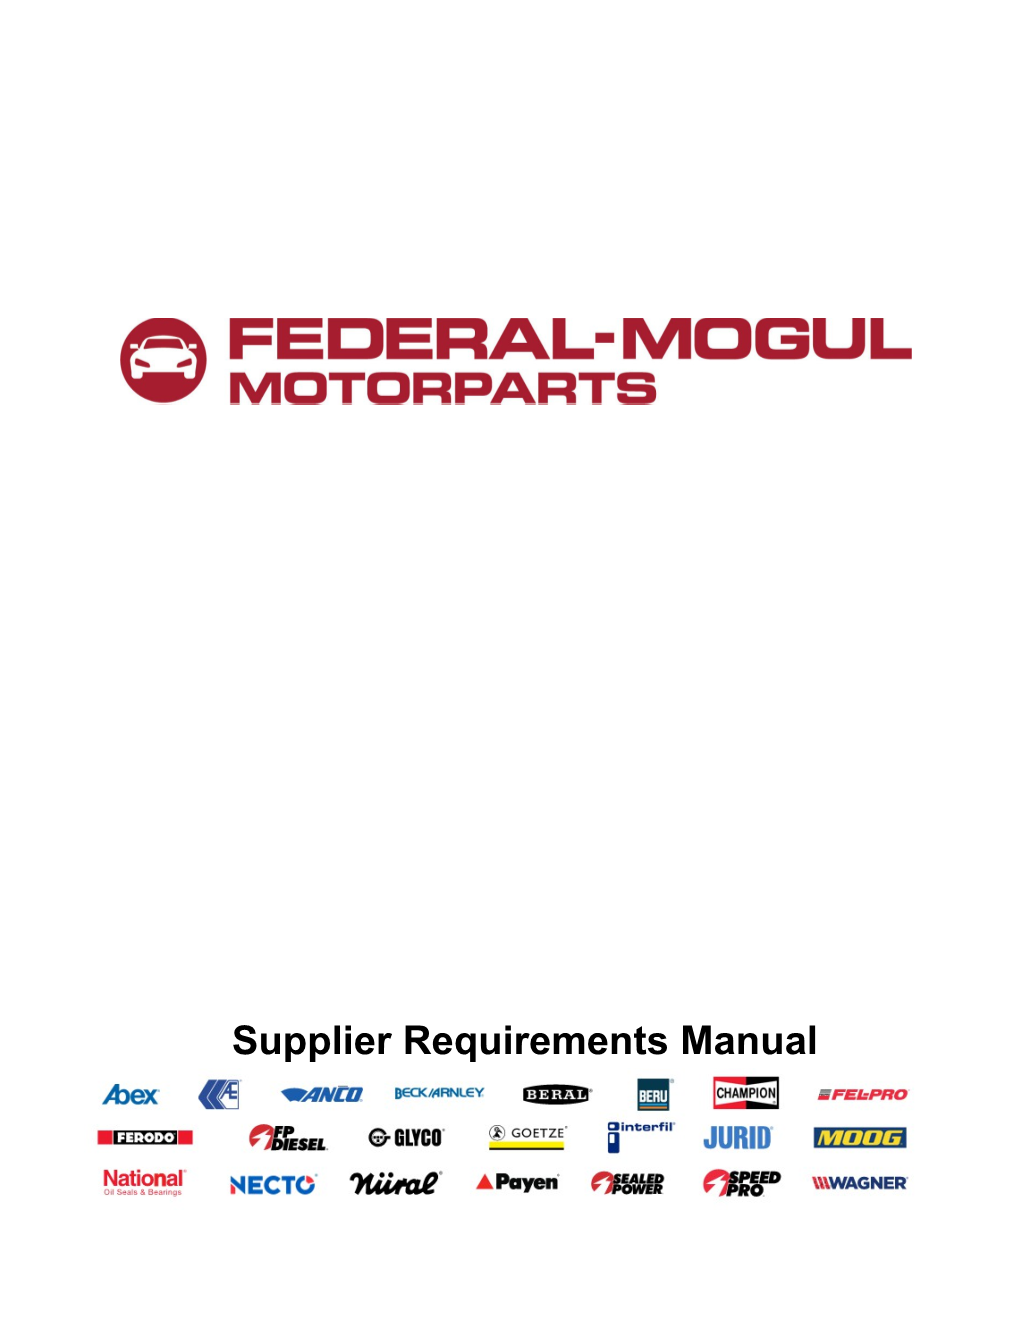 Supplier Requirements Manual